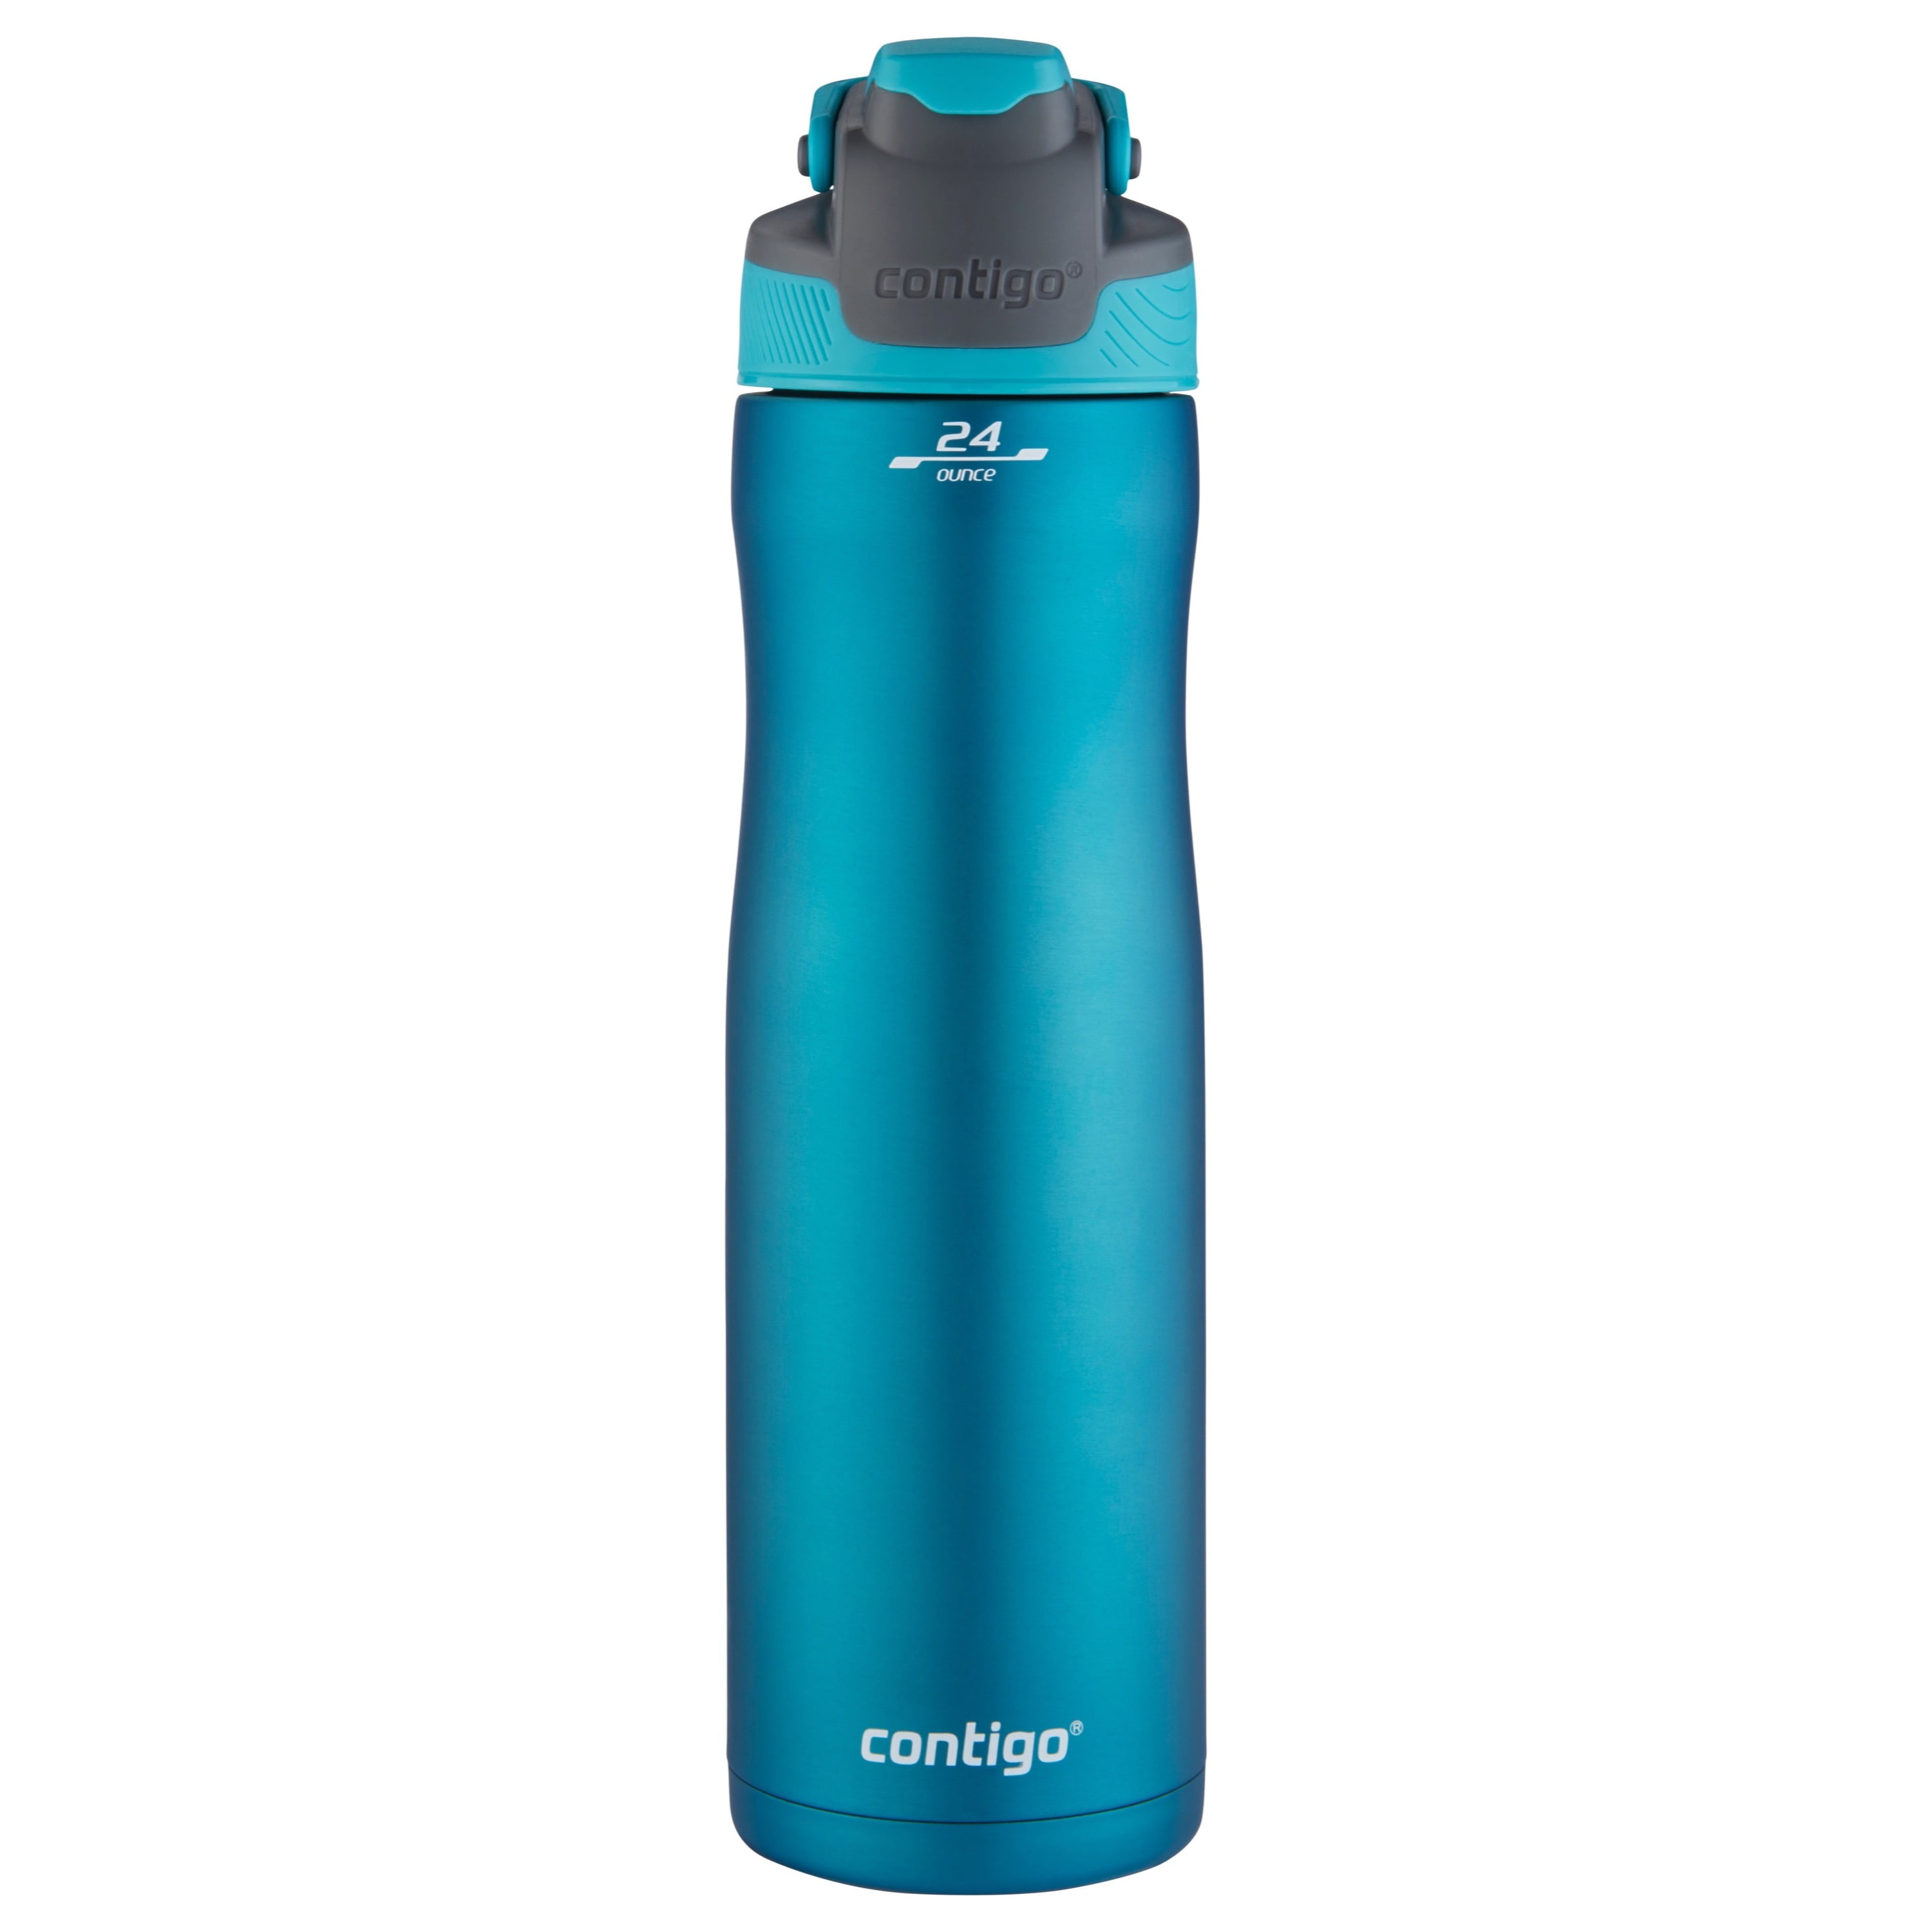 Contigo Cortland Chill Stainless Steel Water Bottle with AUTOSEAL Lid Blue  Monaco, 24 fl oz. 